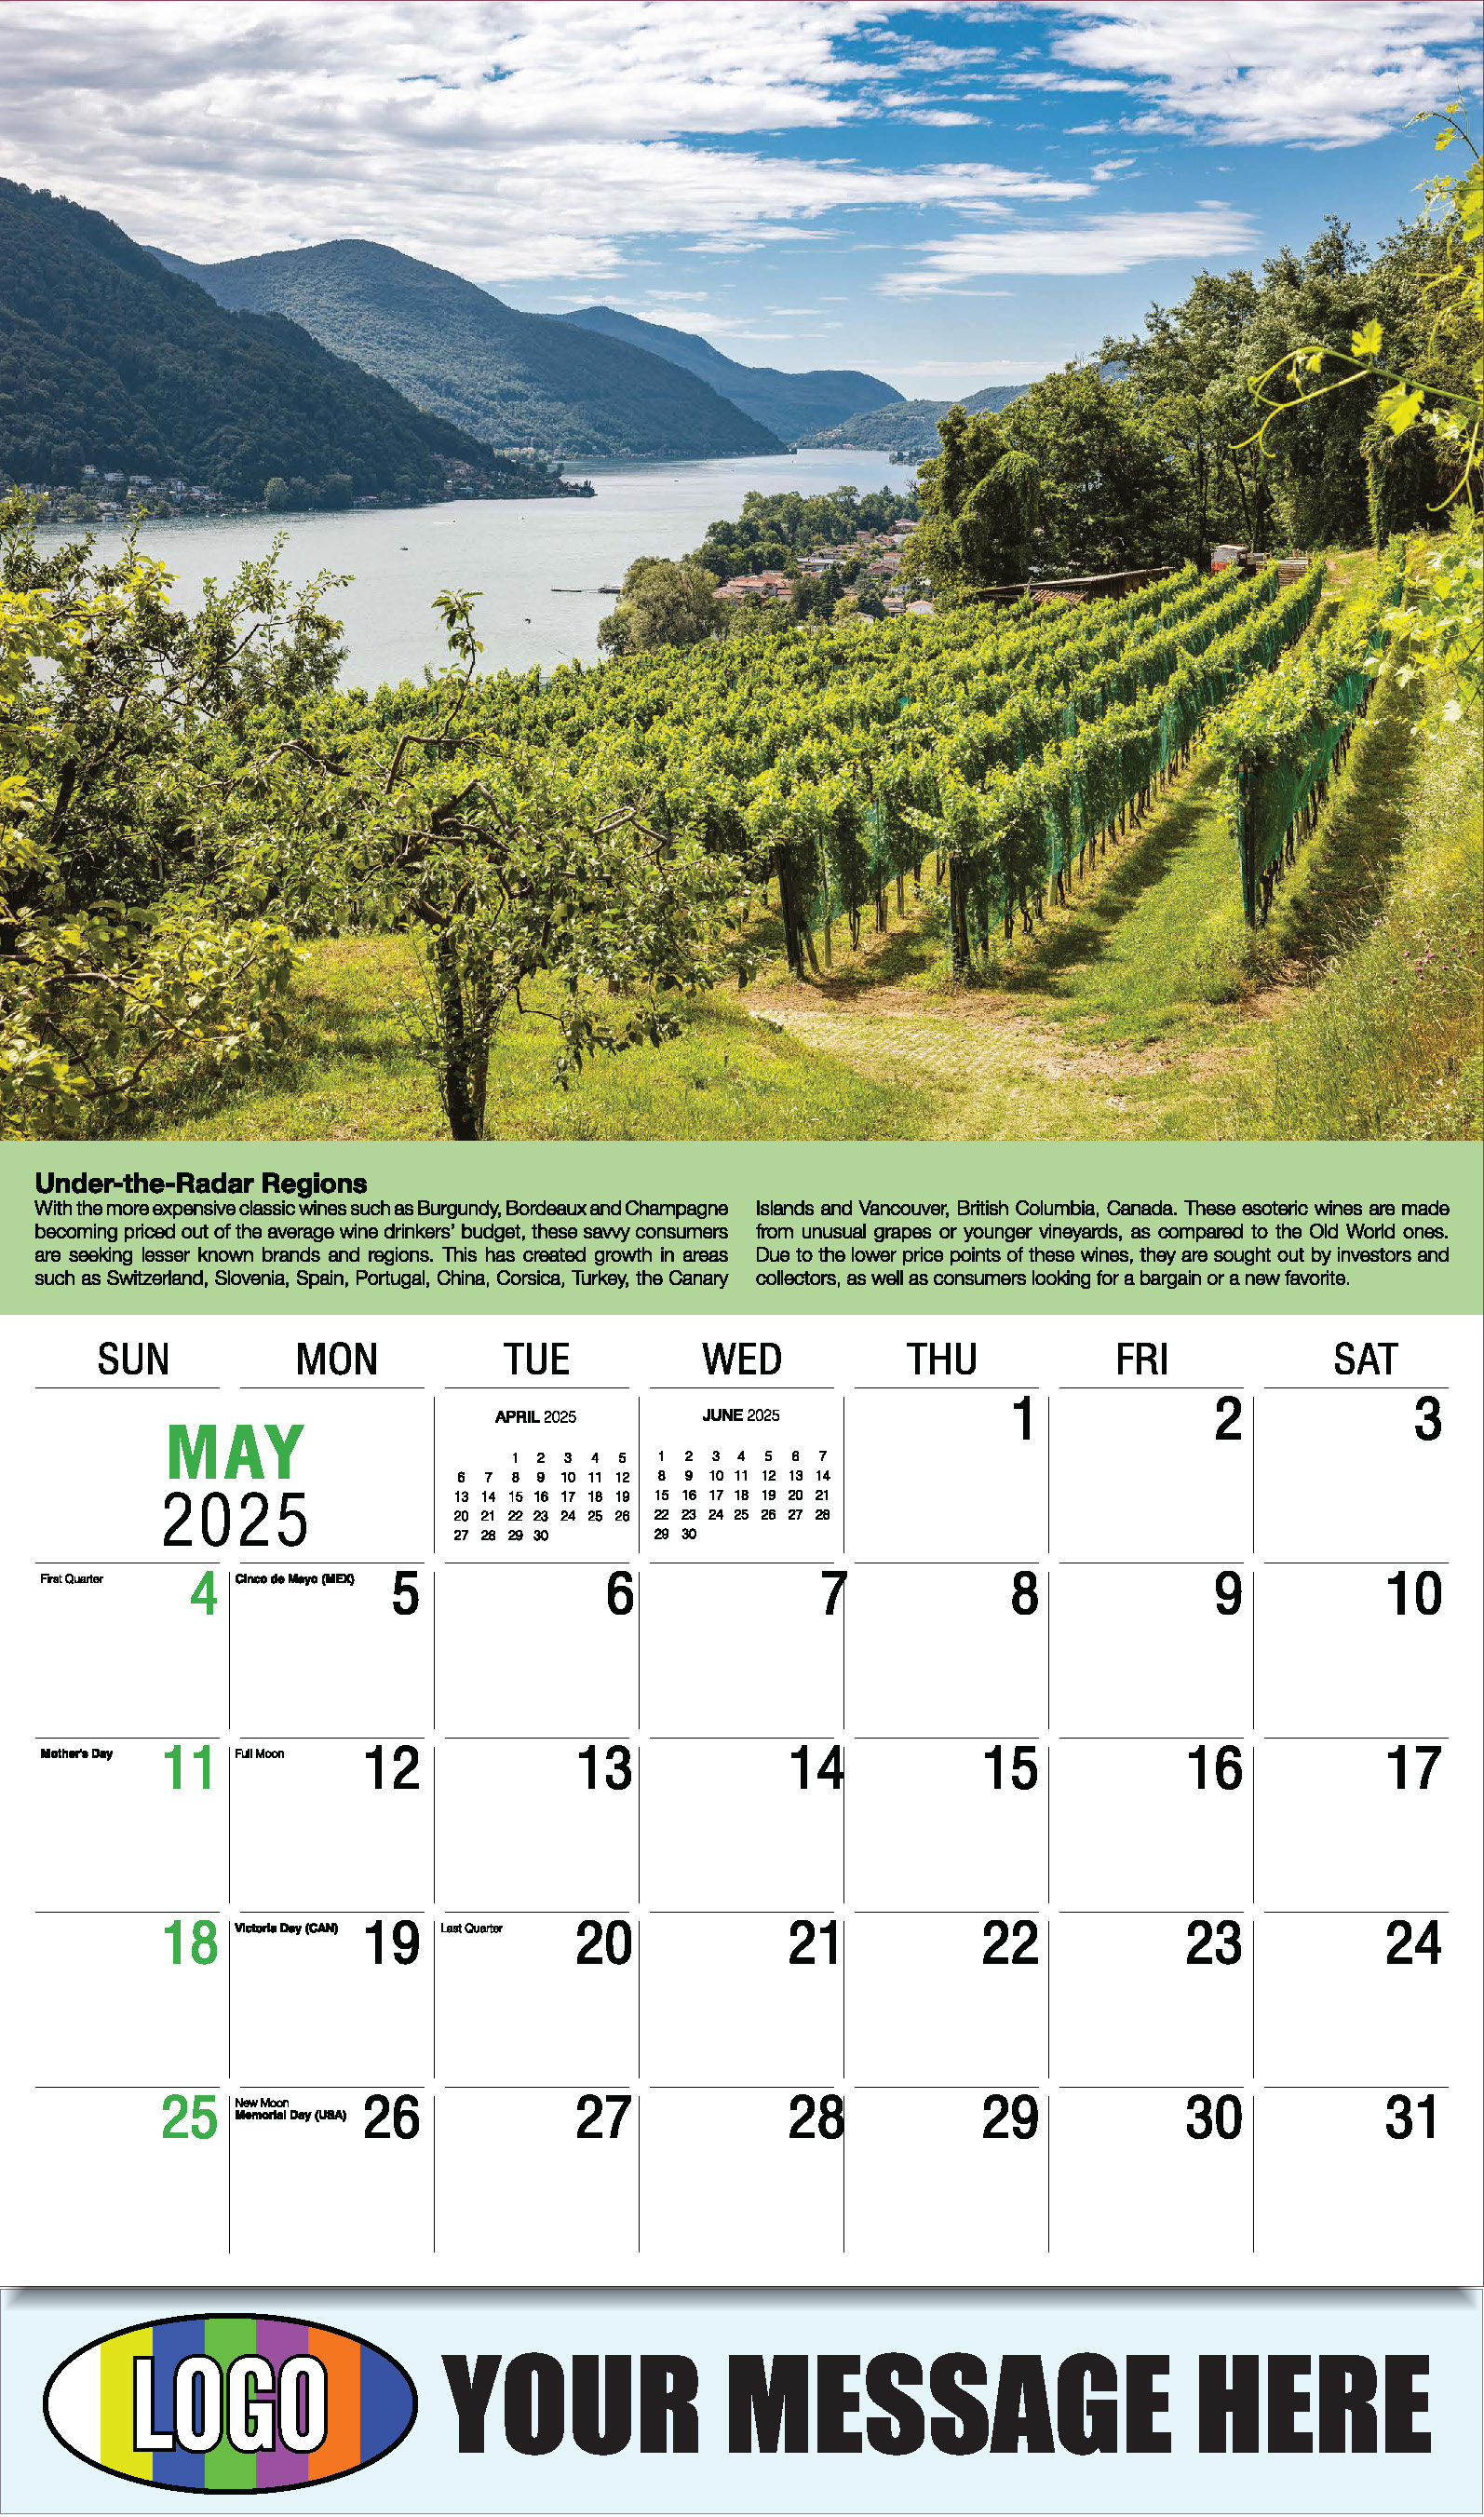 Vintages - Wine Tips 2025 Business Promo Calendar - May